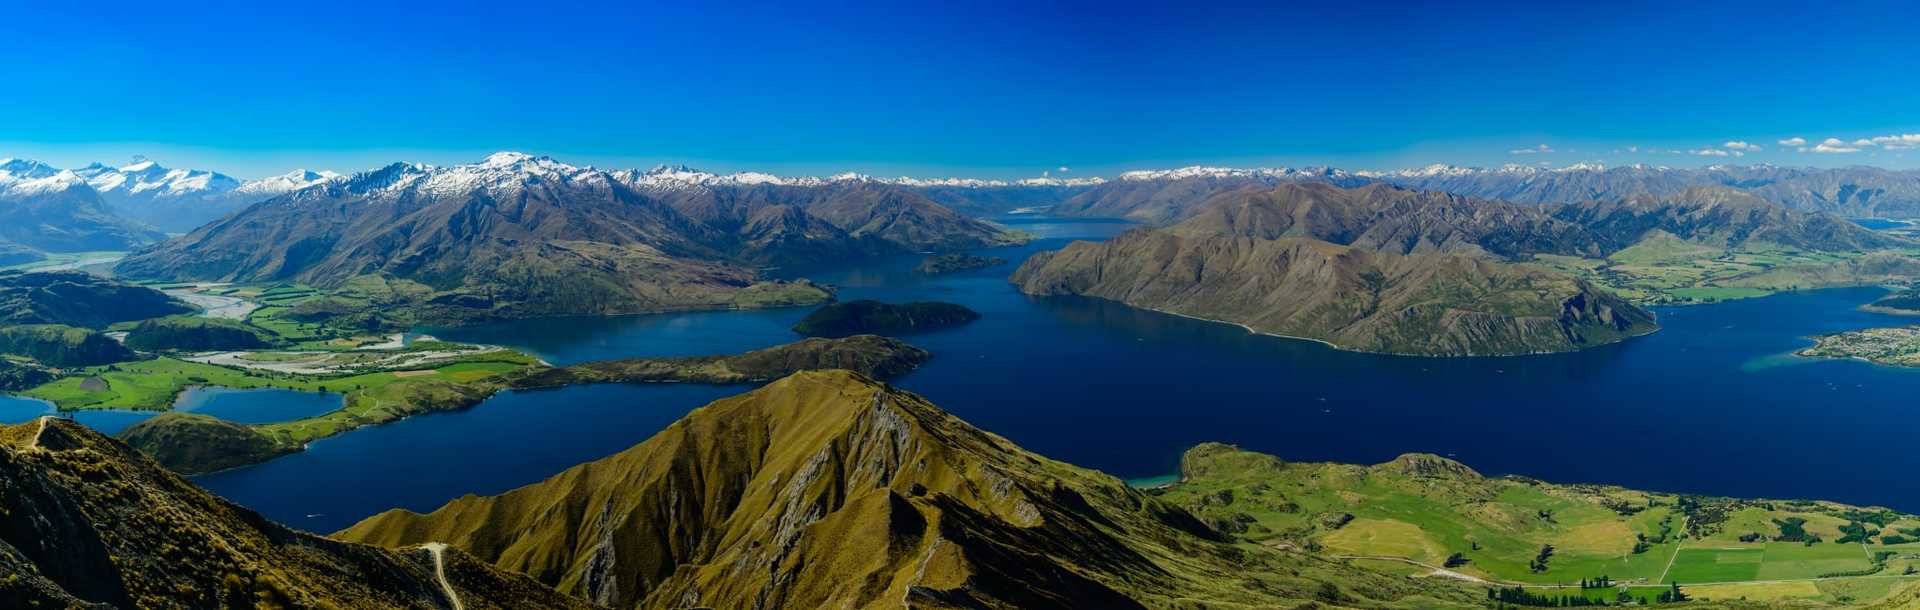 View of New Zealand's Roy's Peak between Wanaka and Glendhu Bay with Mount Aspiring/Tititea in the background.